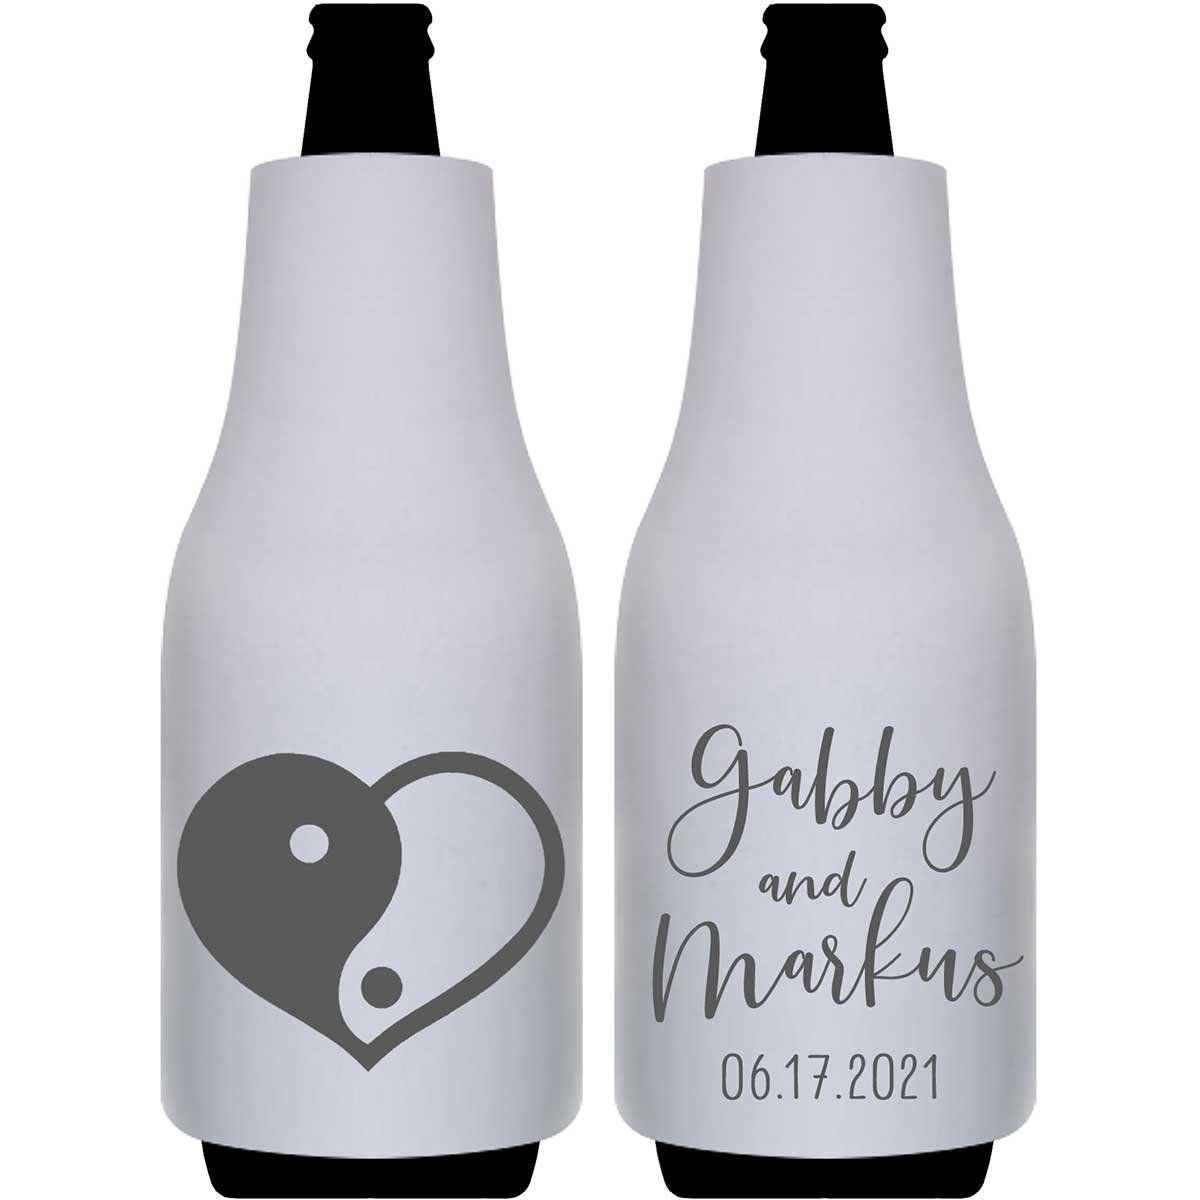 Perfect Half 1A Yin Yang Foldable Bottle Sleeve Koozies Wedding Gifts for Guests